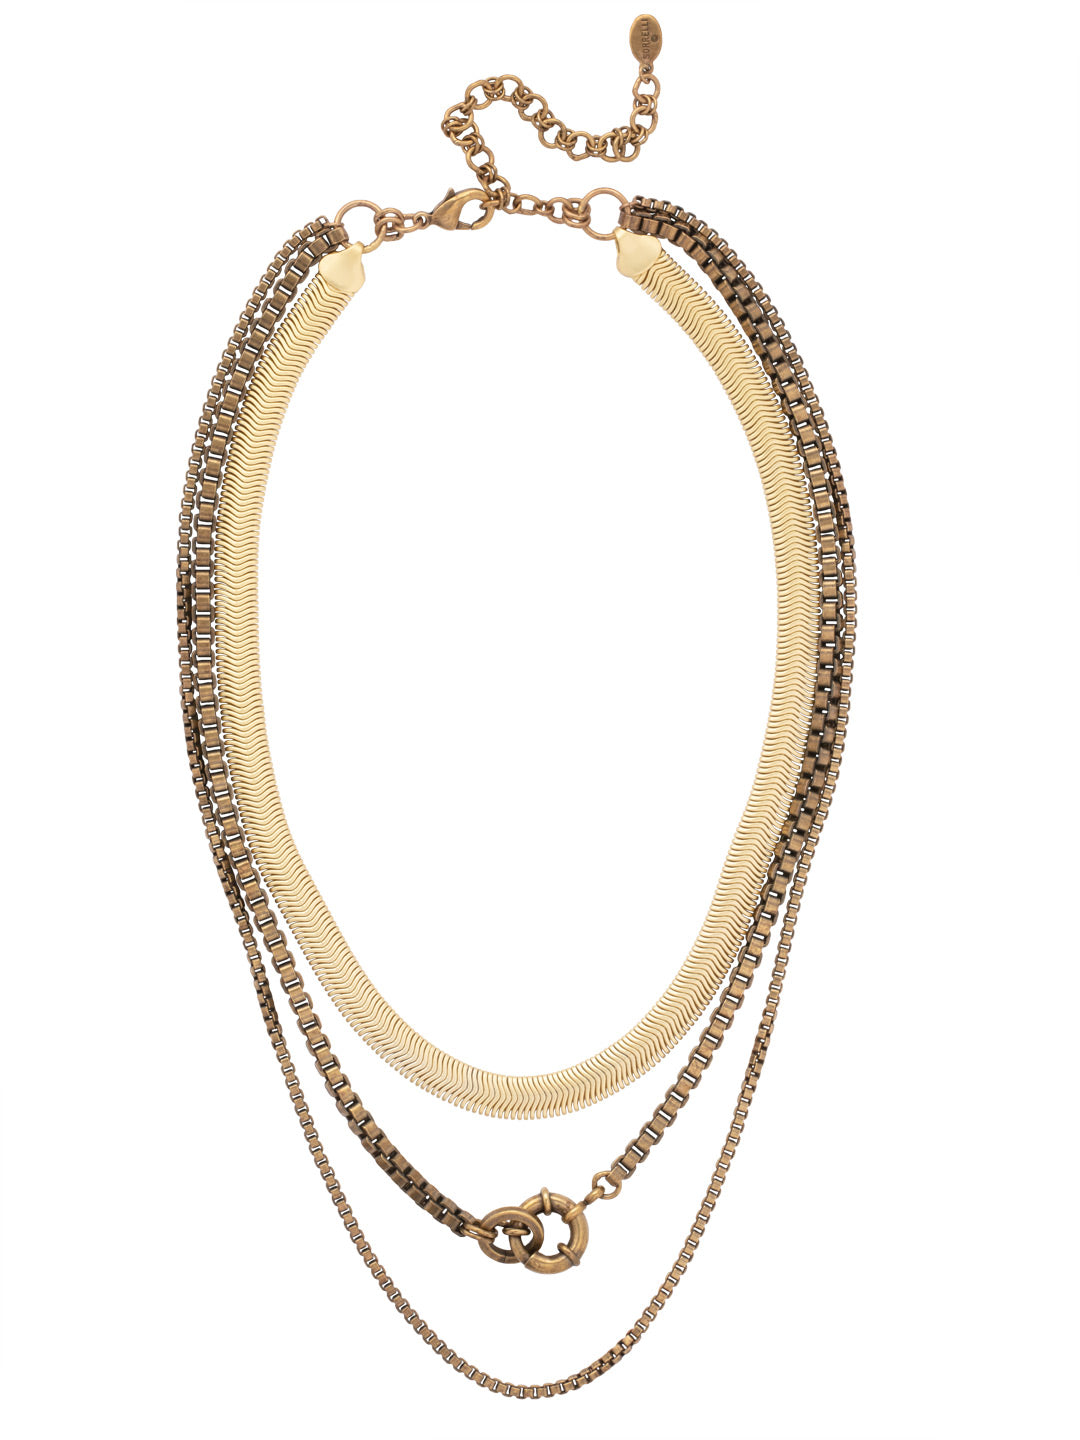 Electra Layered Necklace - 4NFJ3MXMTL - <p>The Electra Layered Necklace features three layers of assorted mixed chains, and a chunky front clasp decorative feature. From Sorrelli's Bare Metallic collection in our Mixed Metal finish.</p>